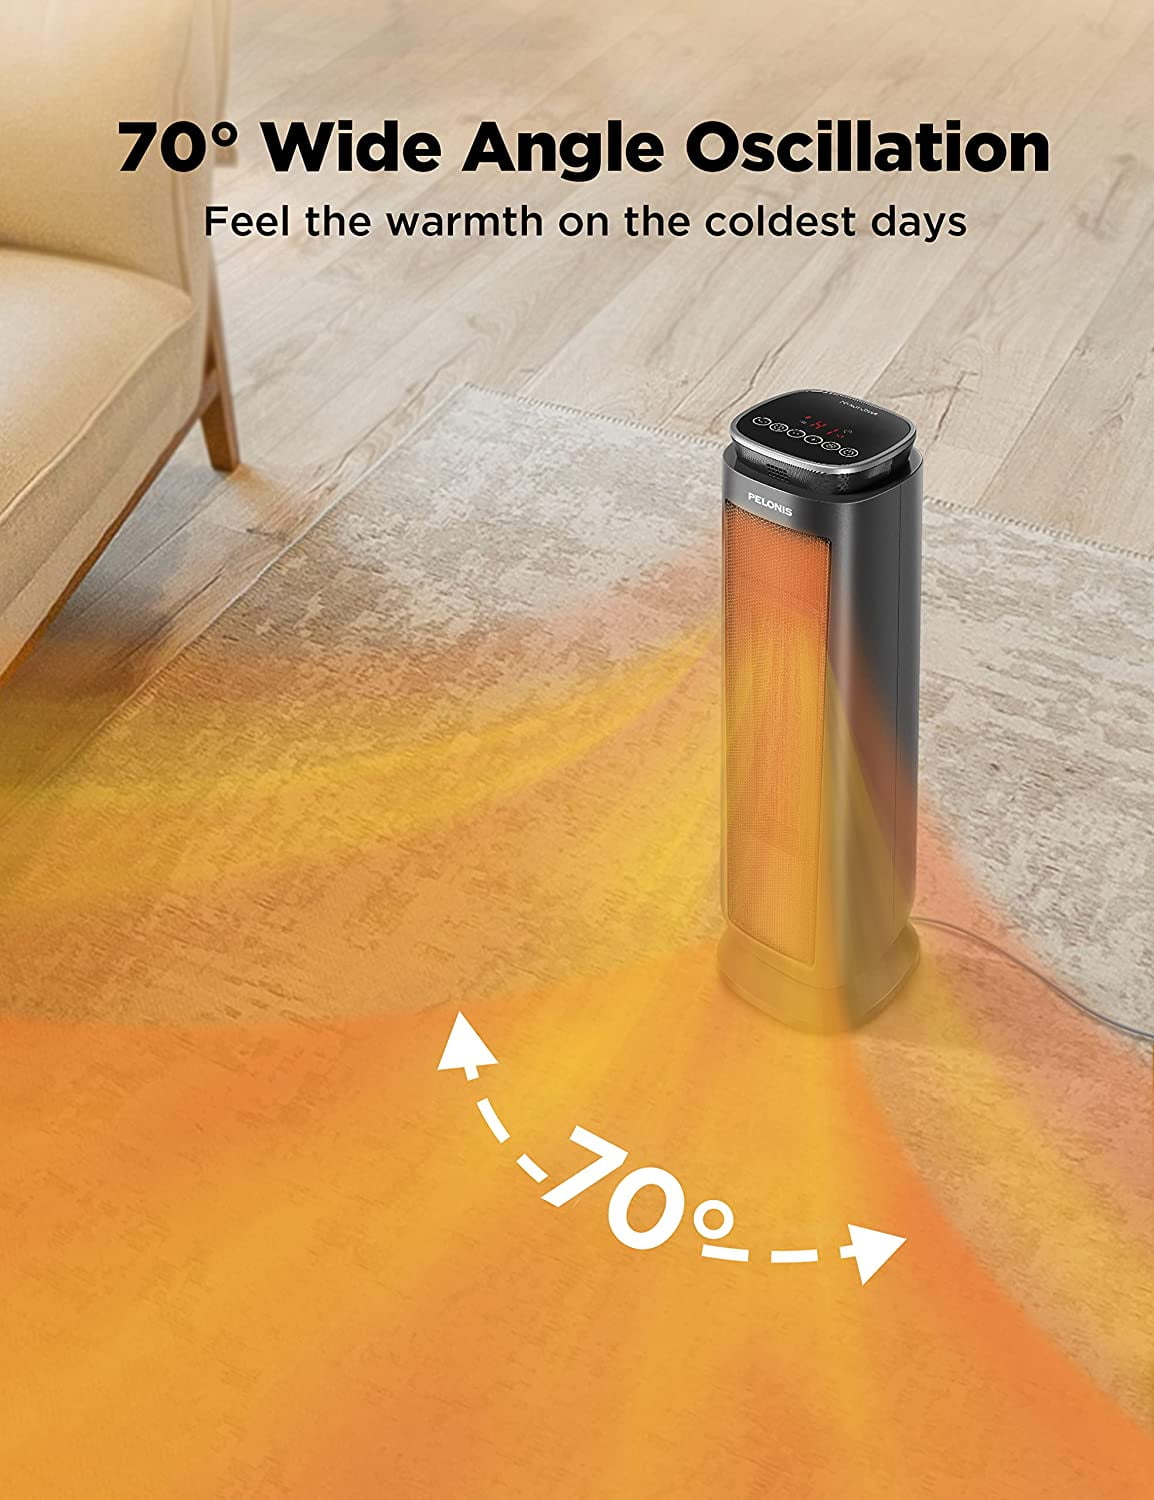 PELONIS Oscillating Ceramic Tower Indoor Space Heater for Home with  Oscillation, Programmable Thermostat & ECO Mode, 12H Timer & Remote  Control, Safety Protection, 23 Inches, 1500W, PHF15RSAPH23 - Yahoo Shopping